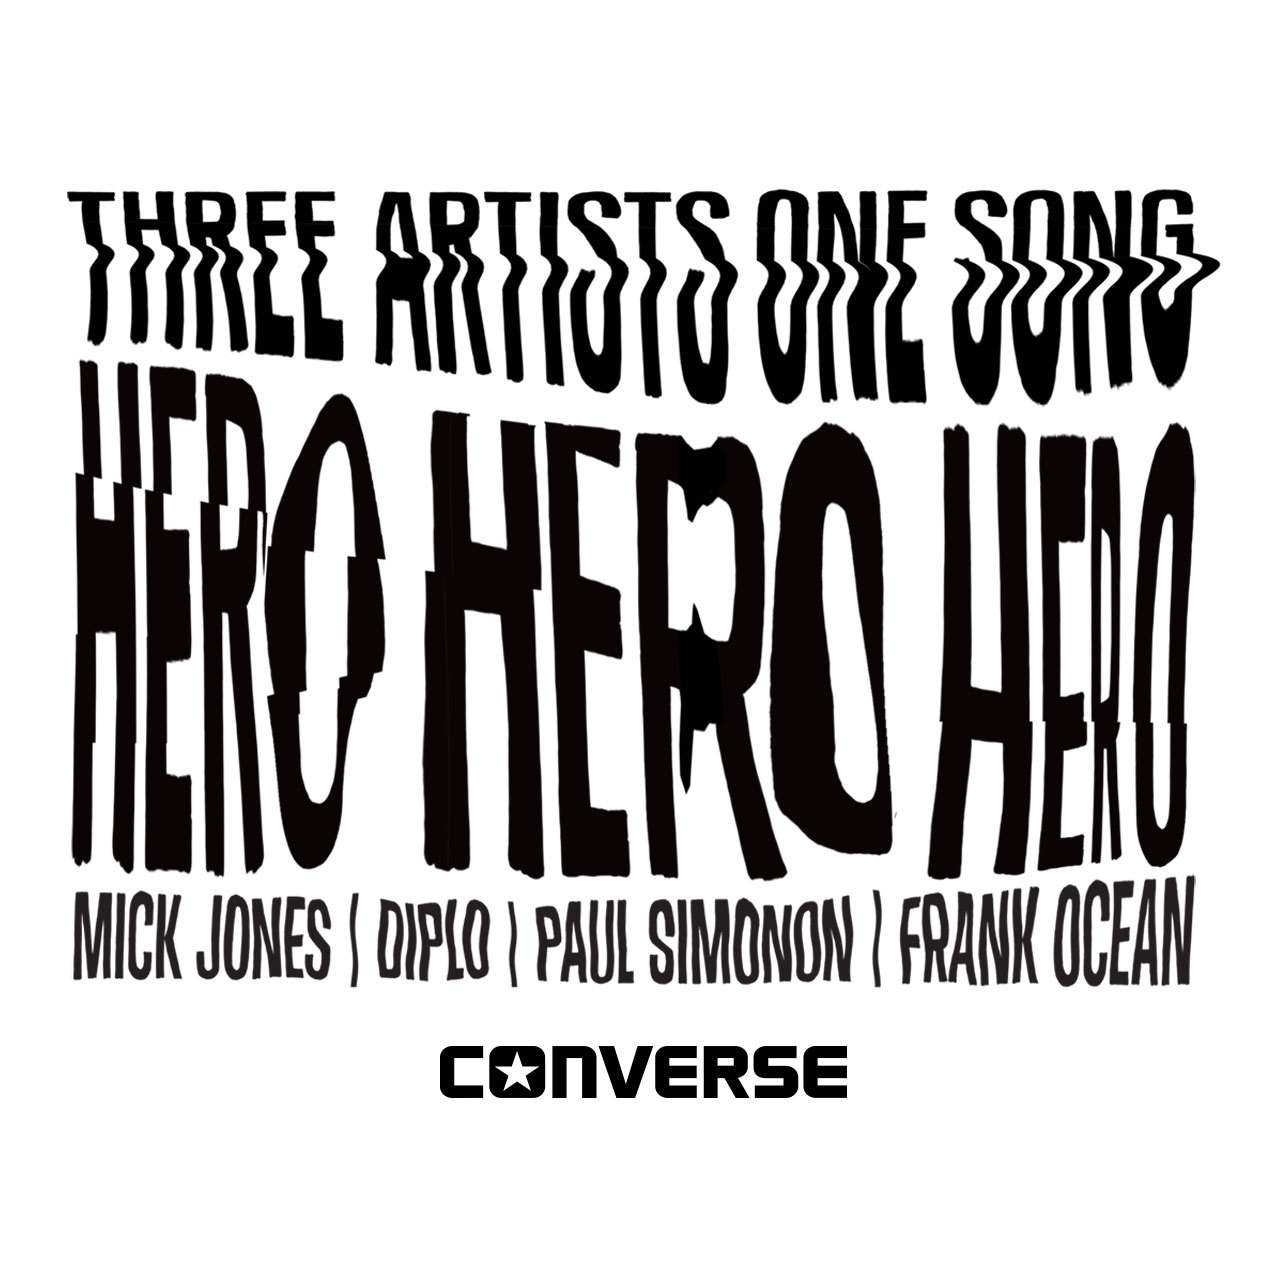 Hyped to reveal the new Three Artists One Song by Mick Jones &amp; Paul Simonon of The Clash, Frank Ocean and @Diplo. Drops Monday.